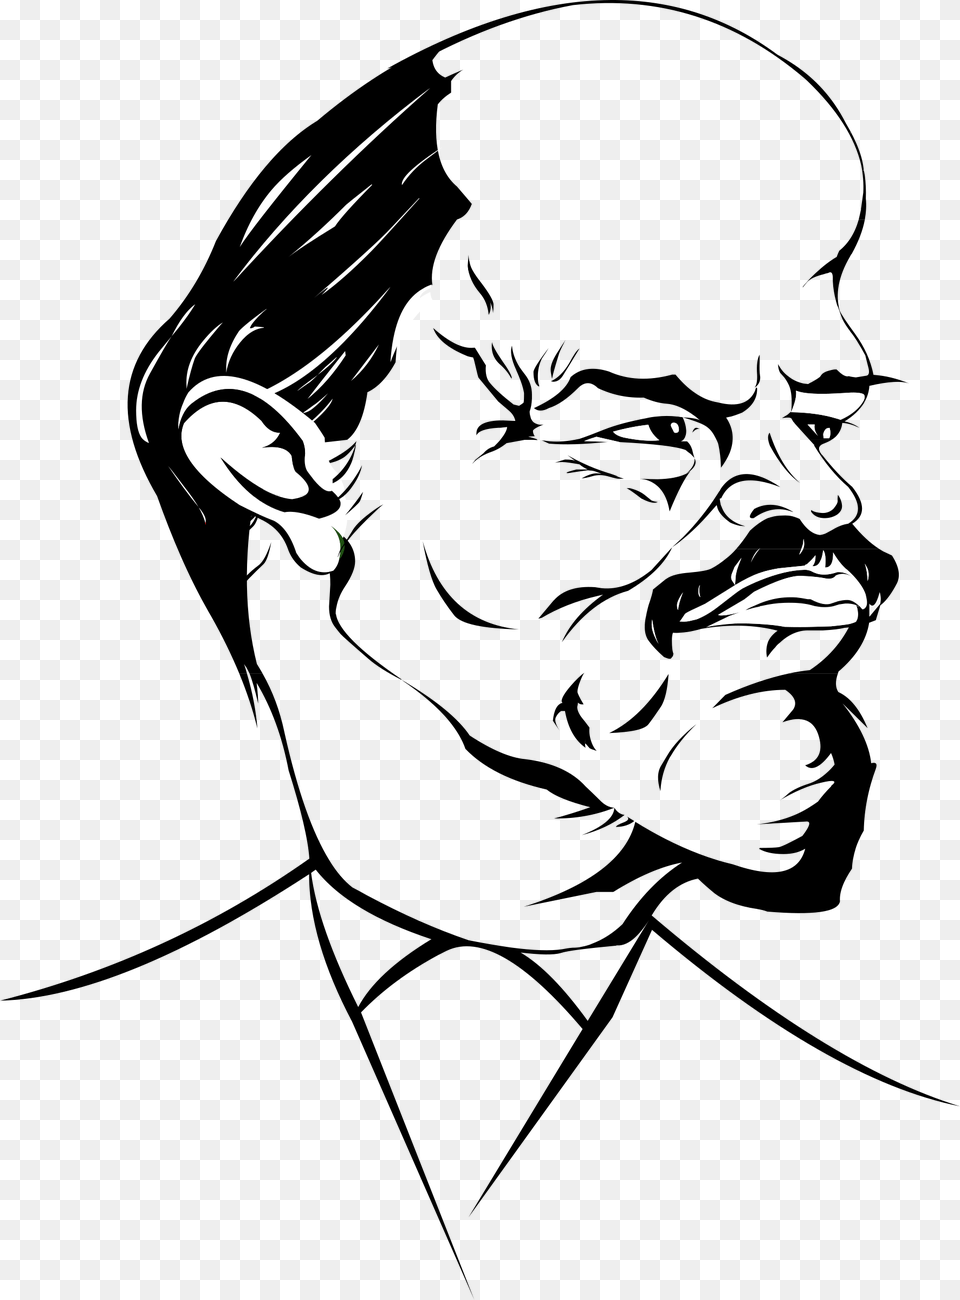 This Icons Design Of Lenin Caricature, Book, Comics, Publication, Art Free Png